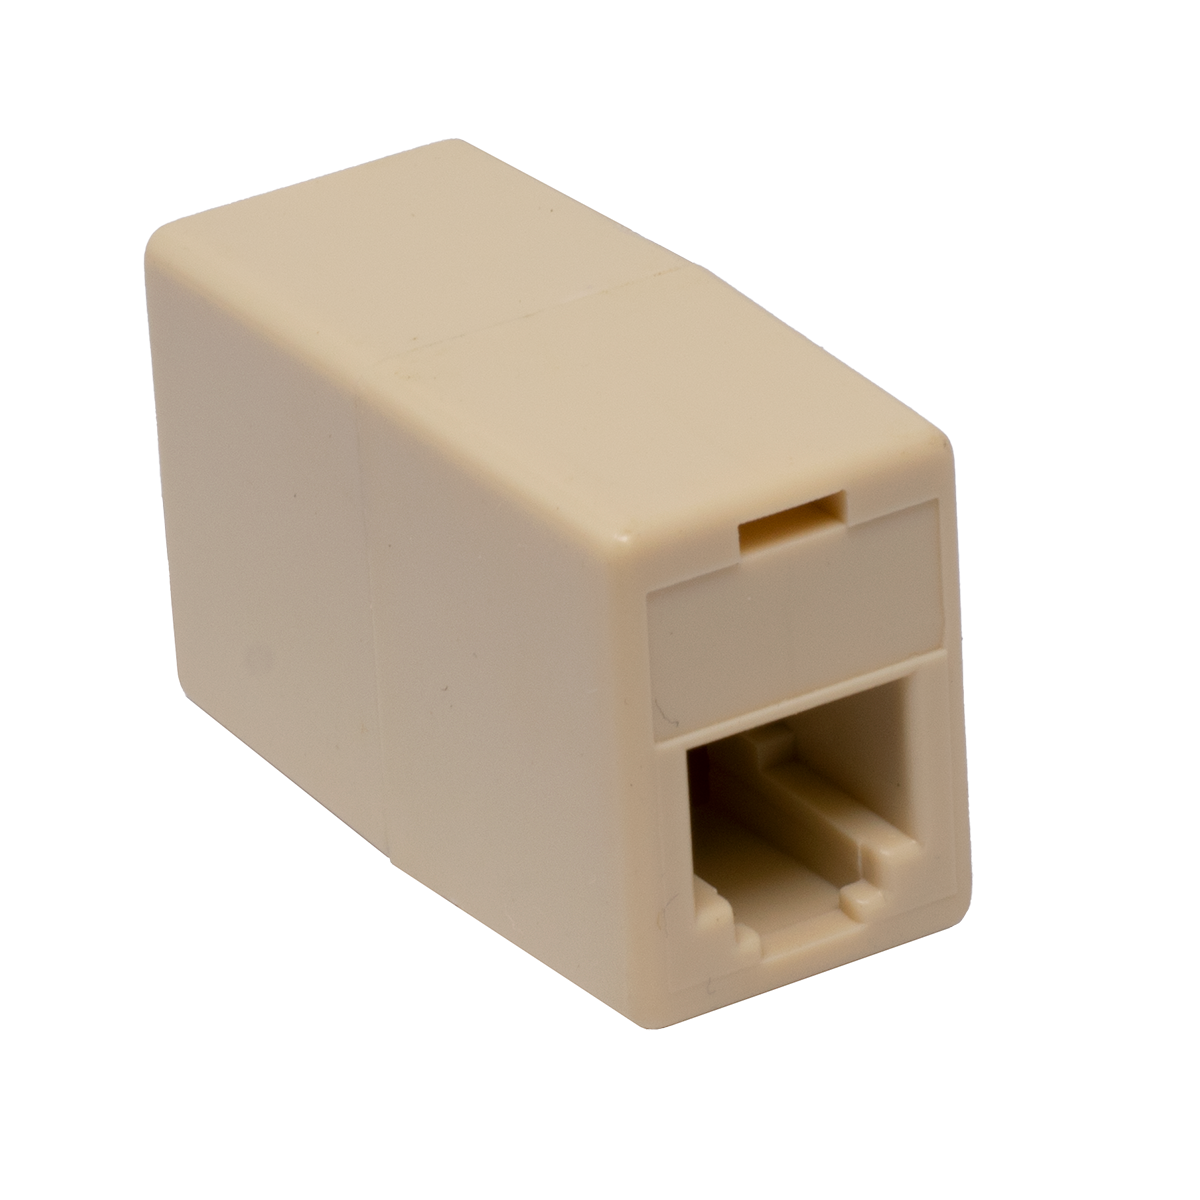 4 Pin Modular In-Line Coupler (Side View)